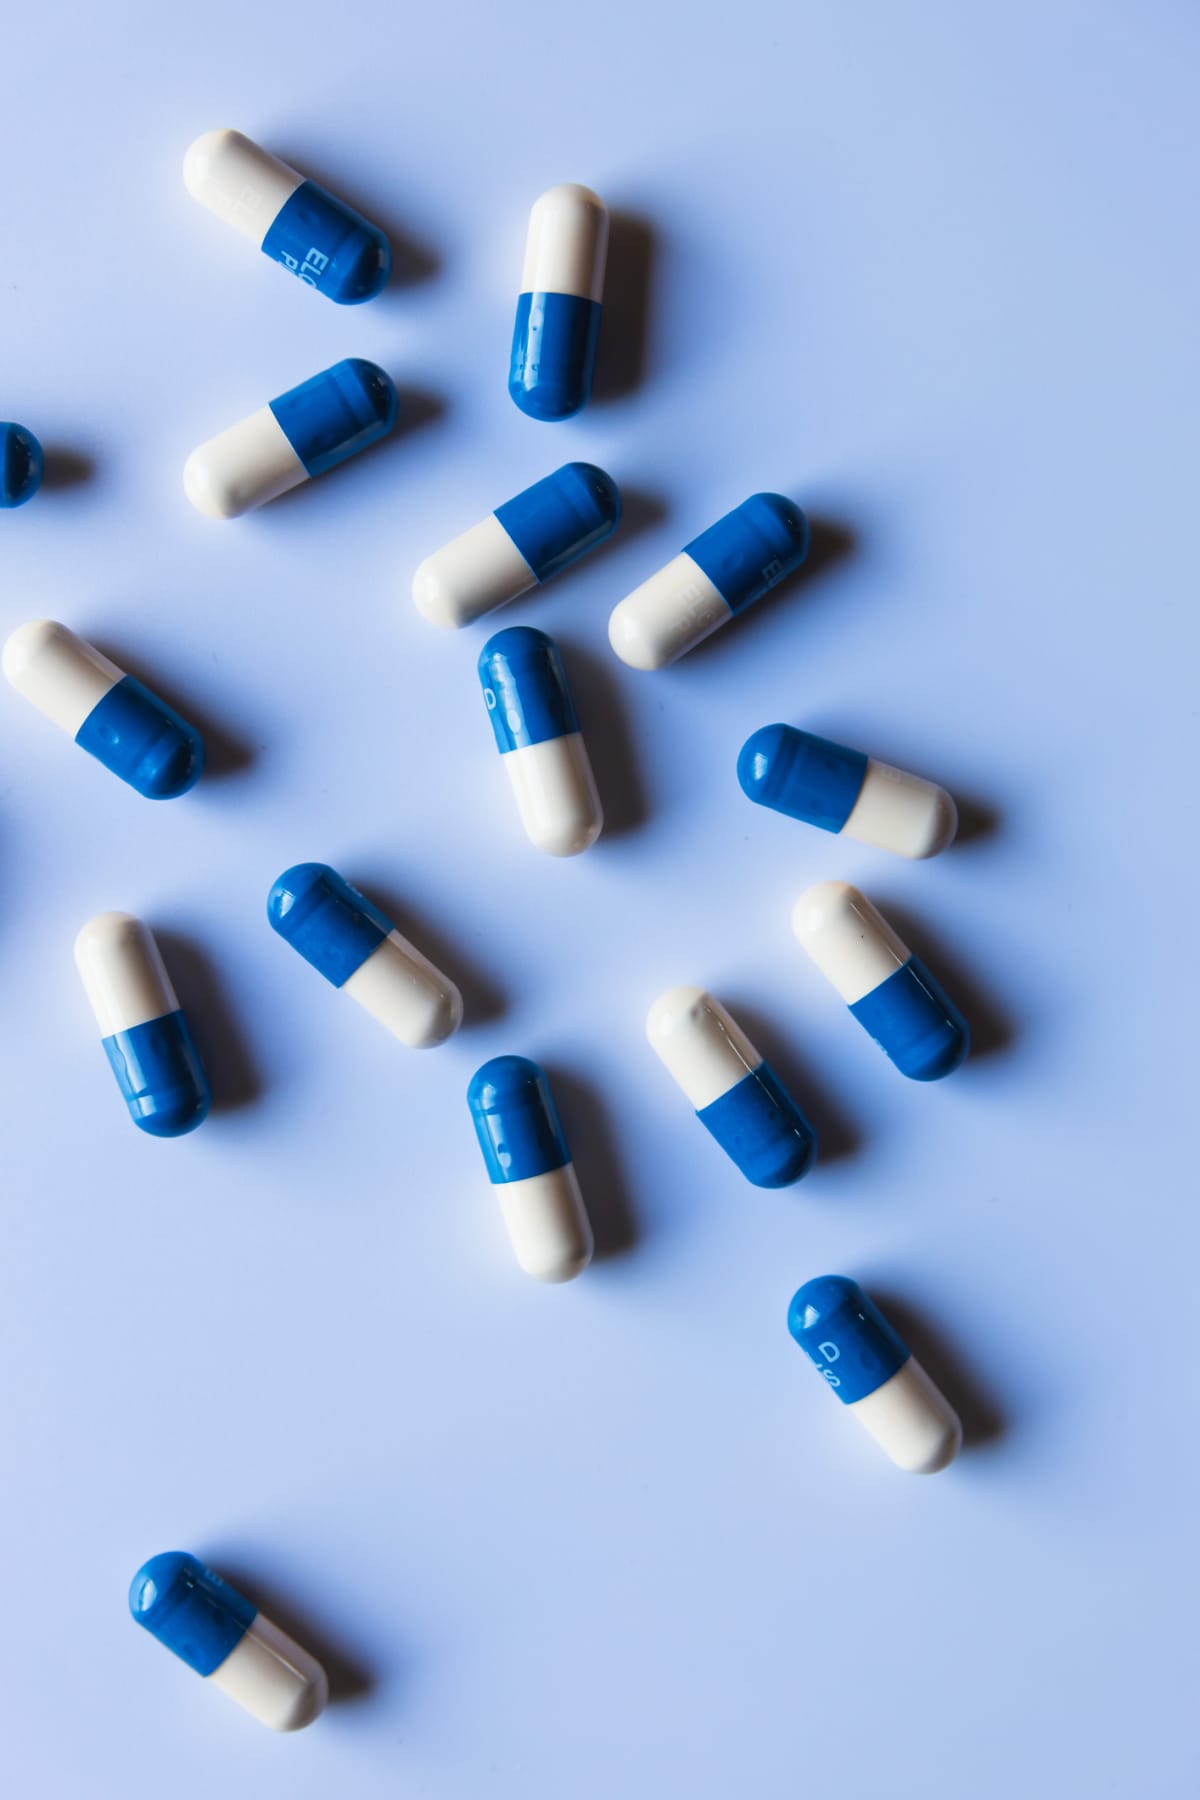 White and blue pills scattered on a surface